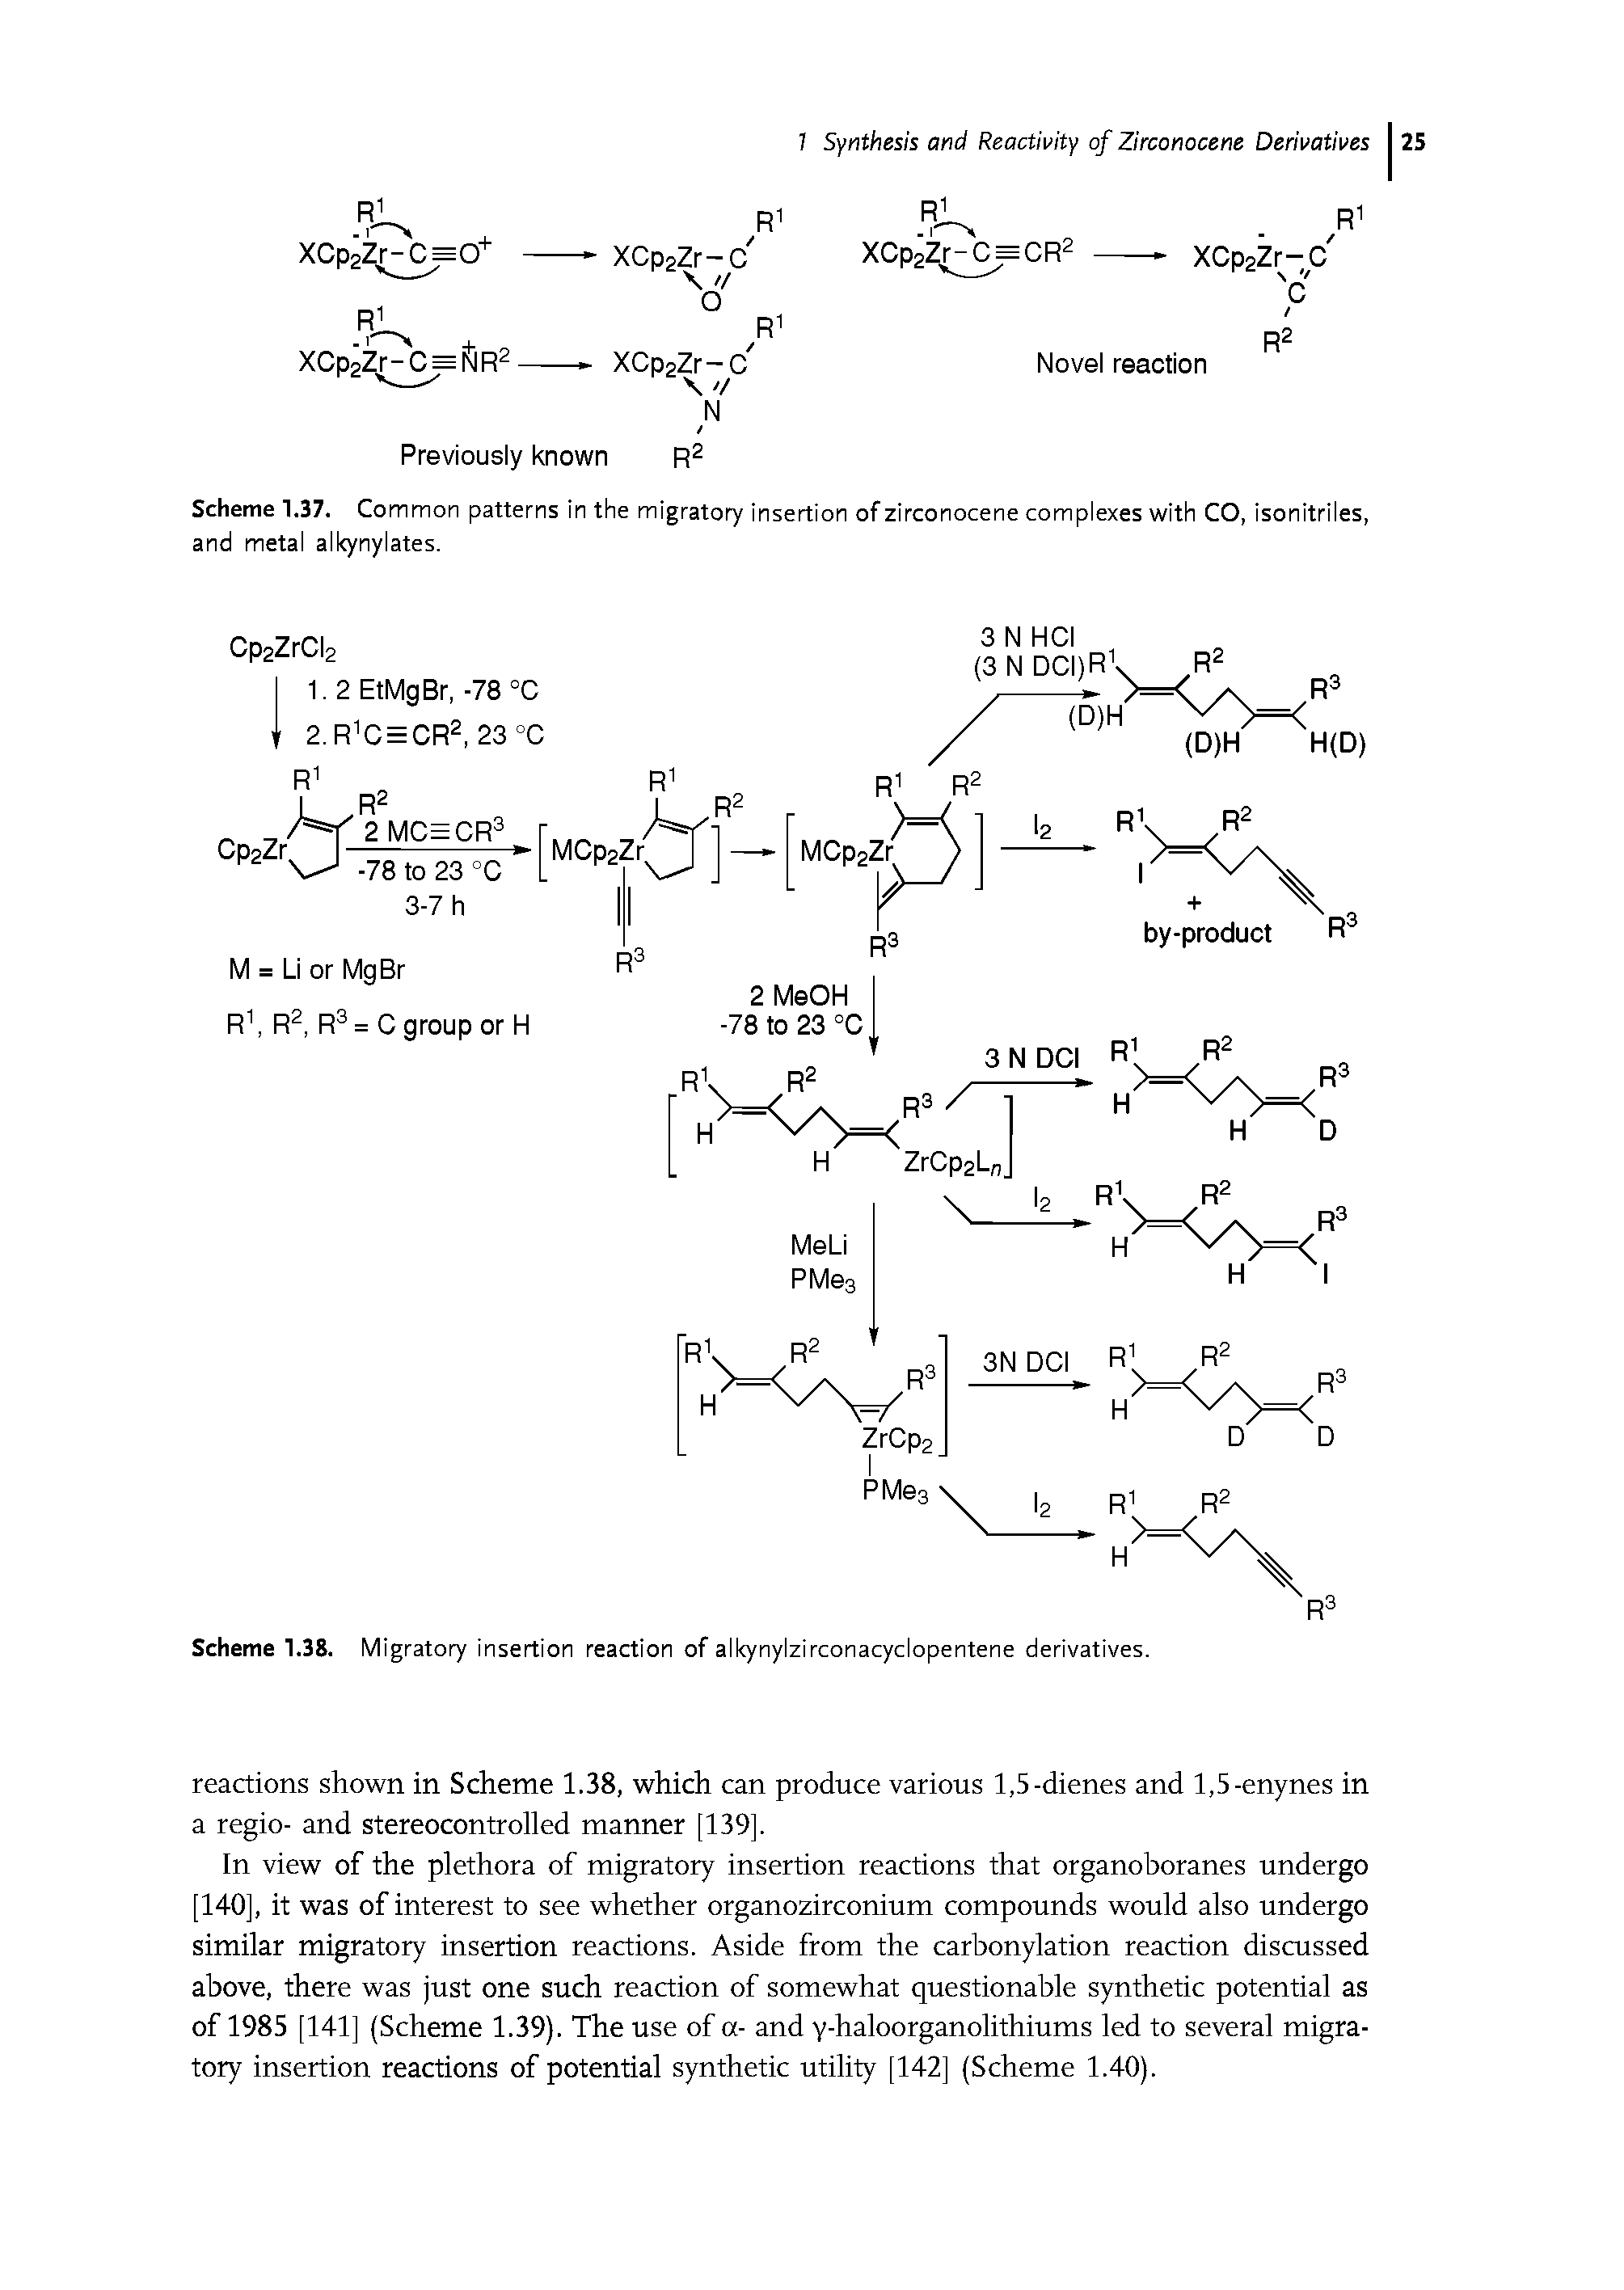 Scheme 1.37. Common patterns in the migratory insertion of zirconocene complexes with CO, isonitriles, and metal alkynylates.